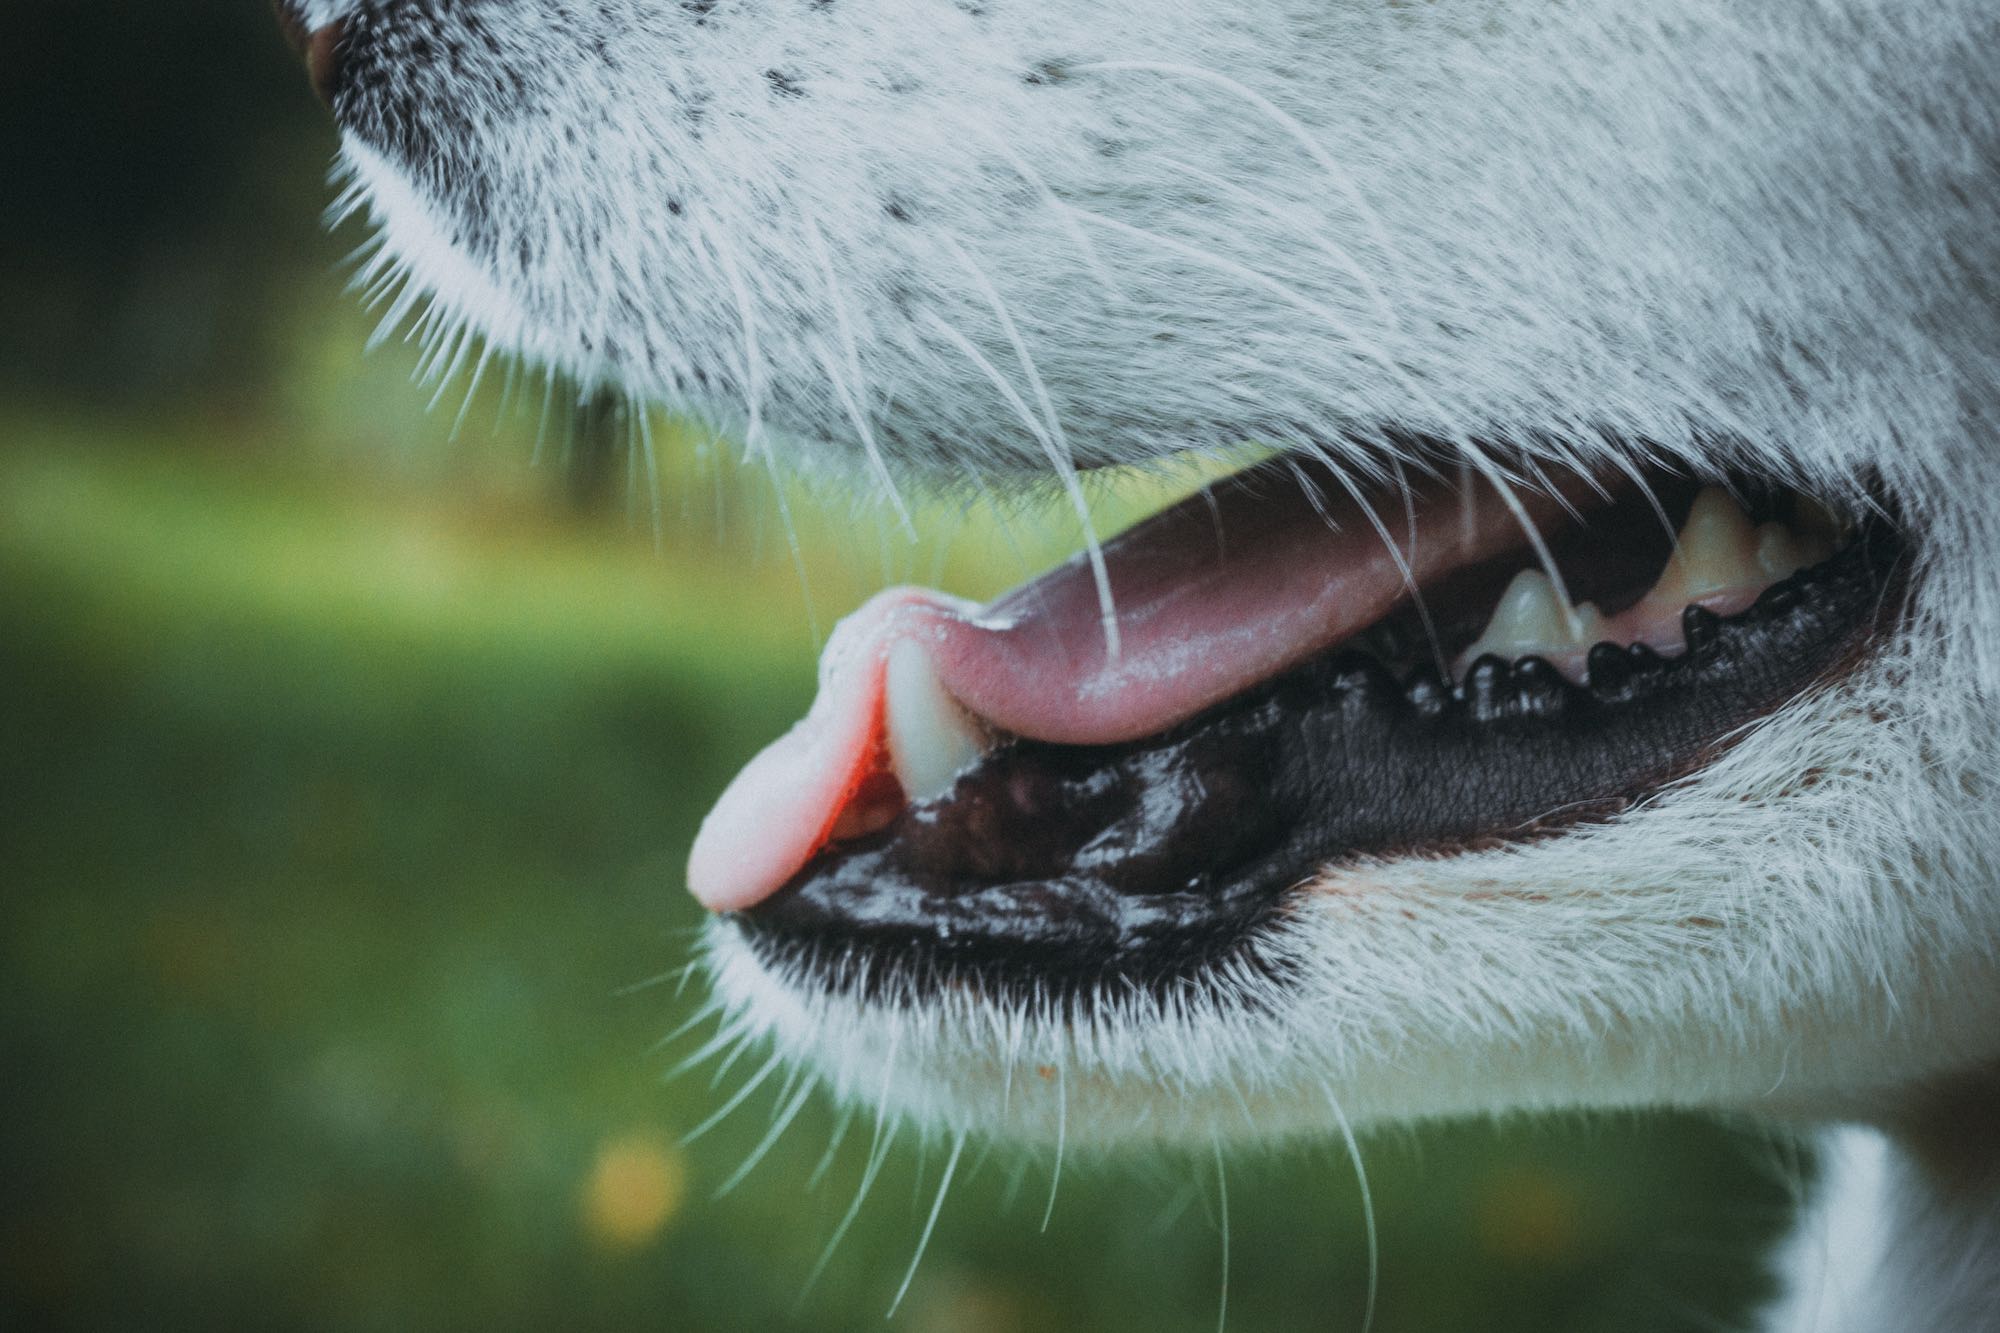 how to treat dog acne around mouth